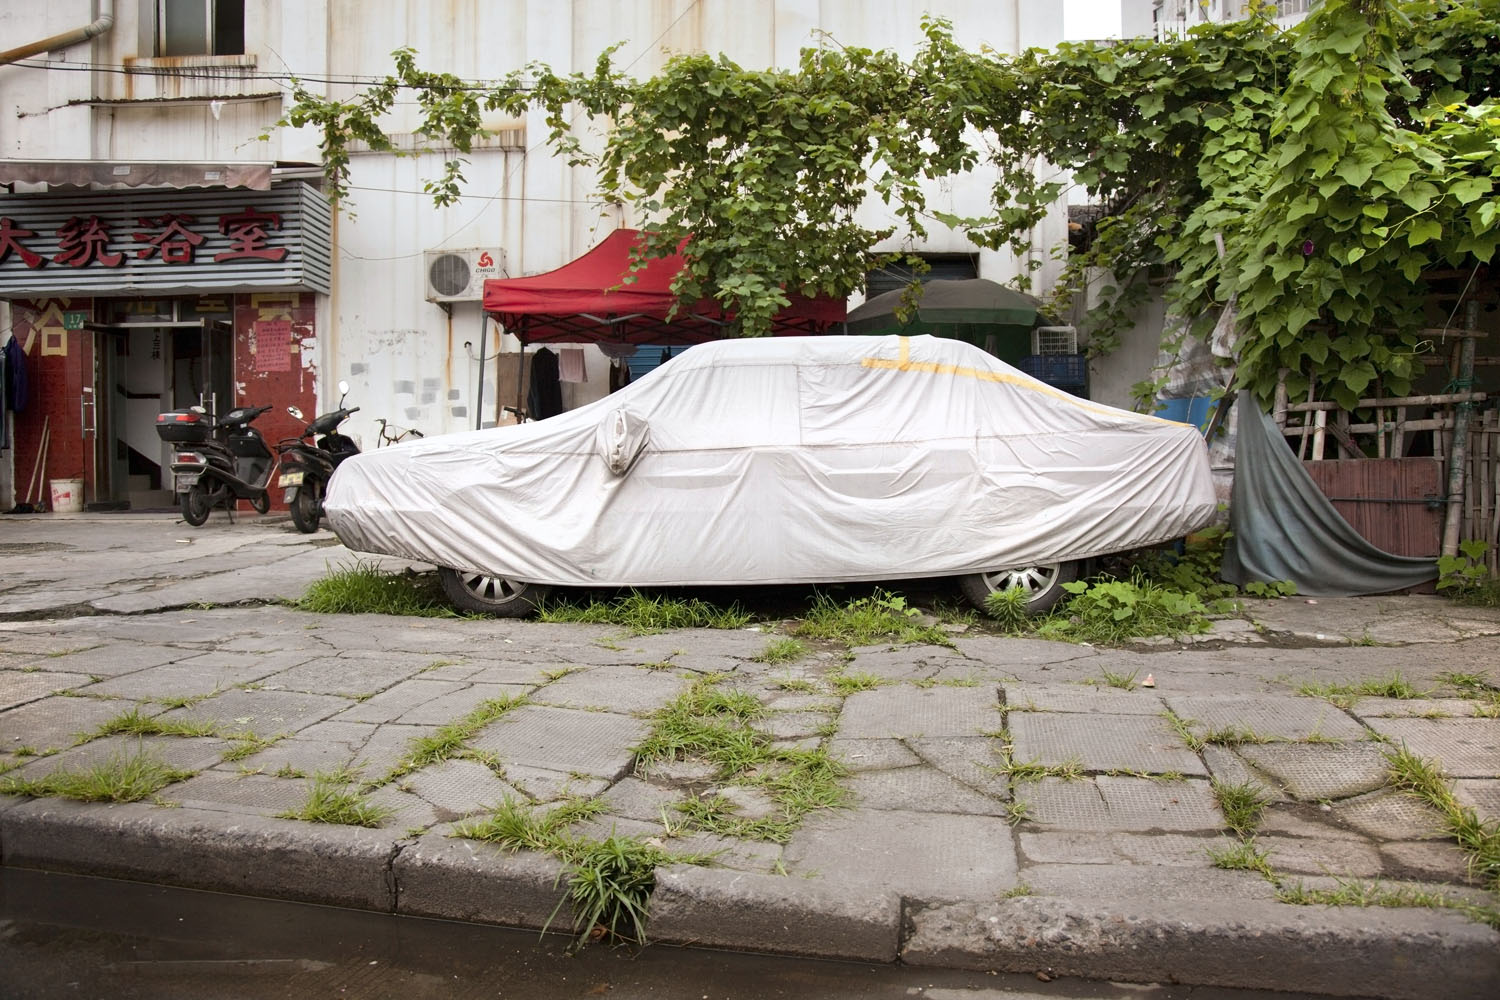 A tarp-covered car parked in an old neighborhood in Huangpu District. Shanghai, China. 2012.